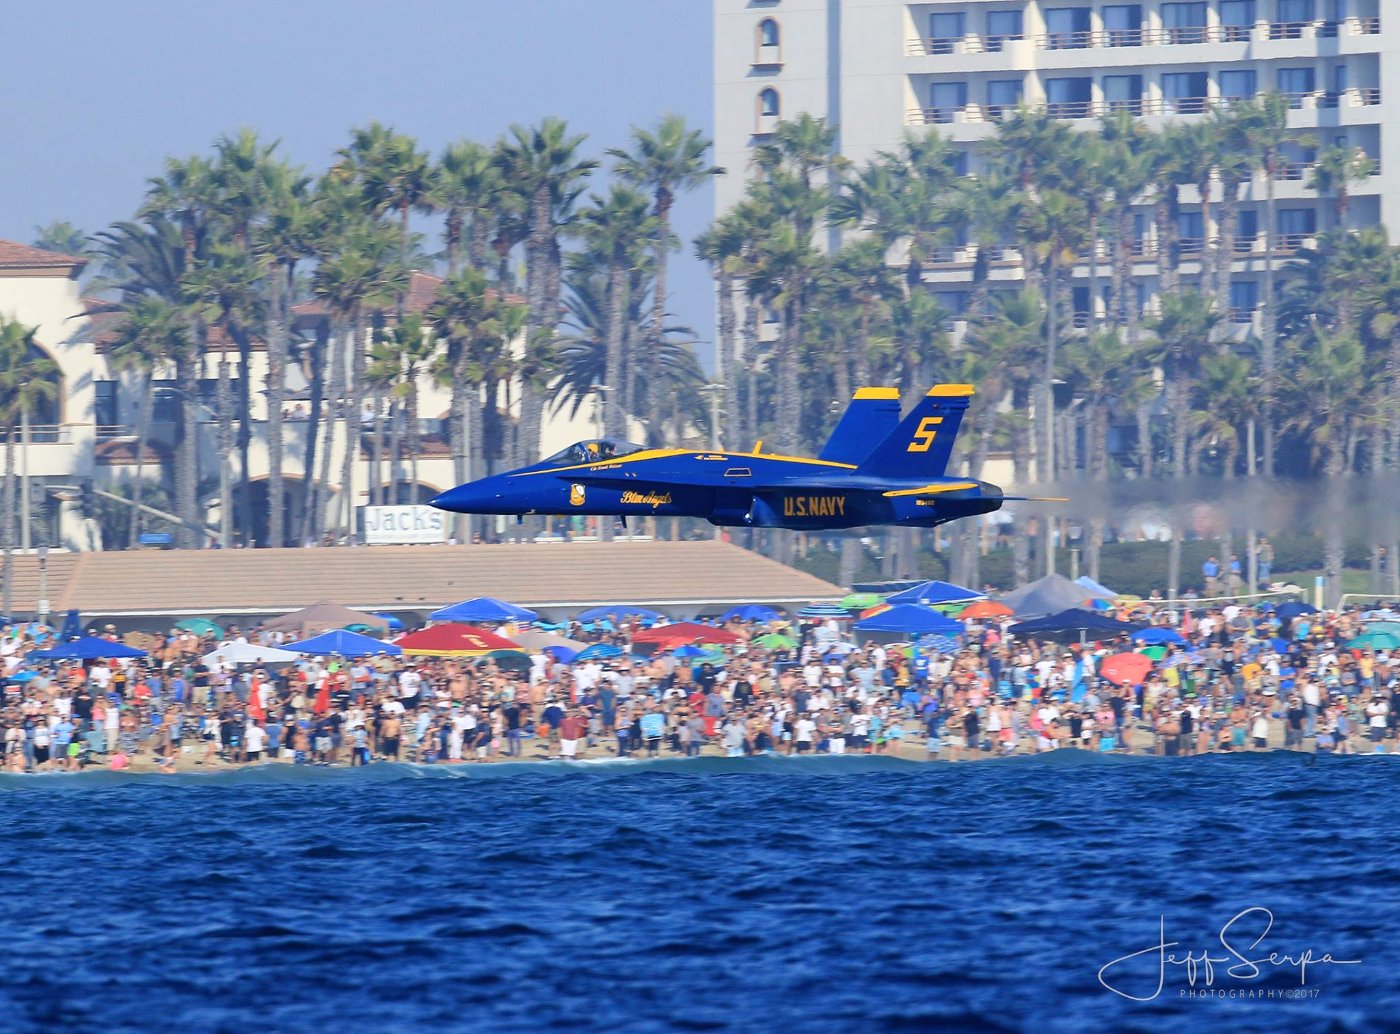 Blue Angel #5, Commander Frank Weisser on the Sneak Pass at the Huntington Beach Airshow